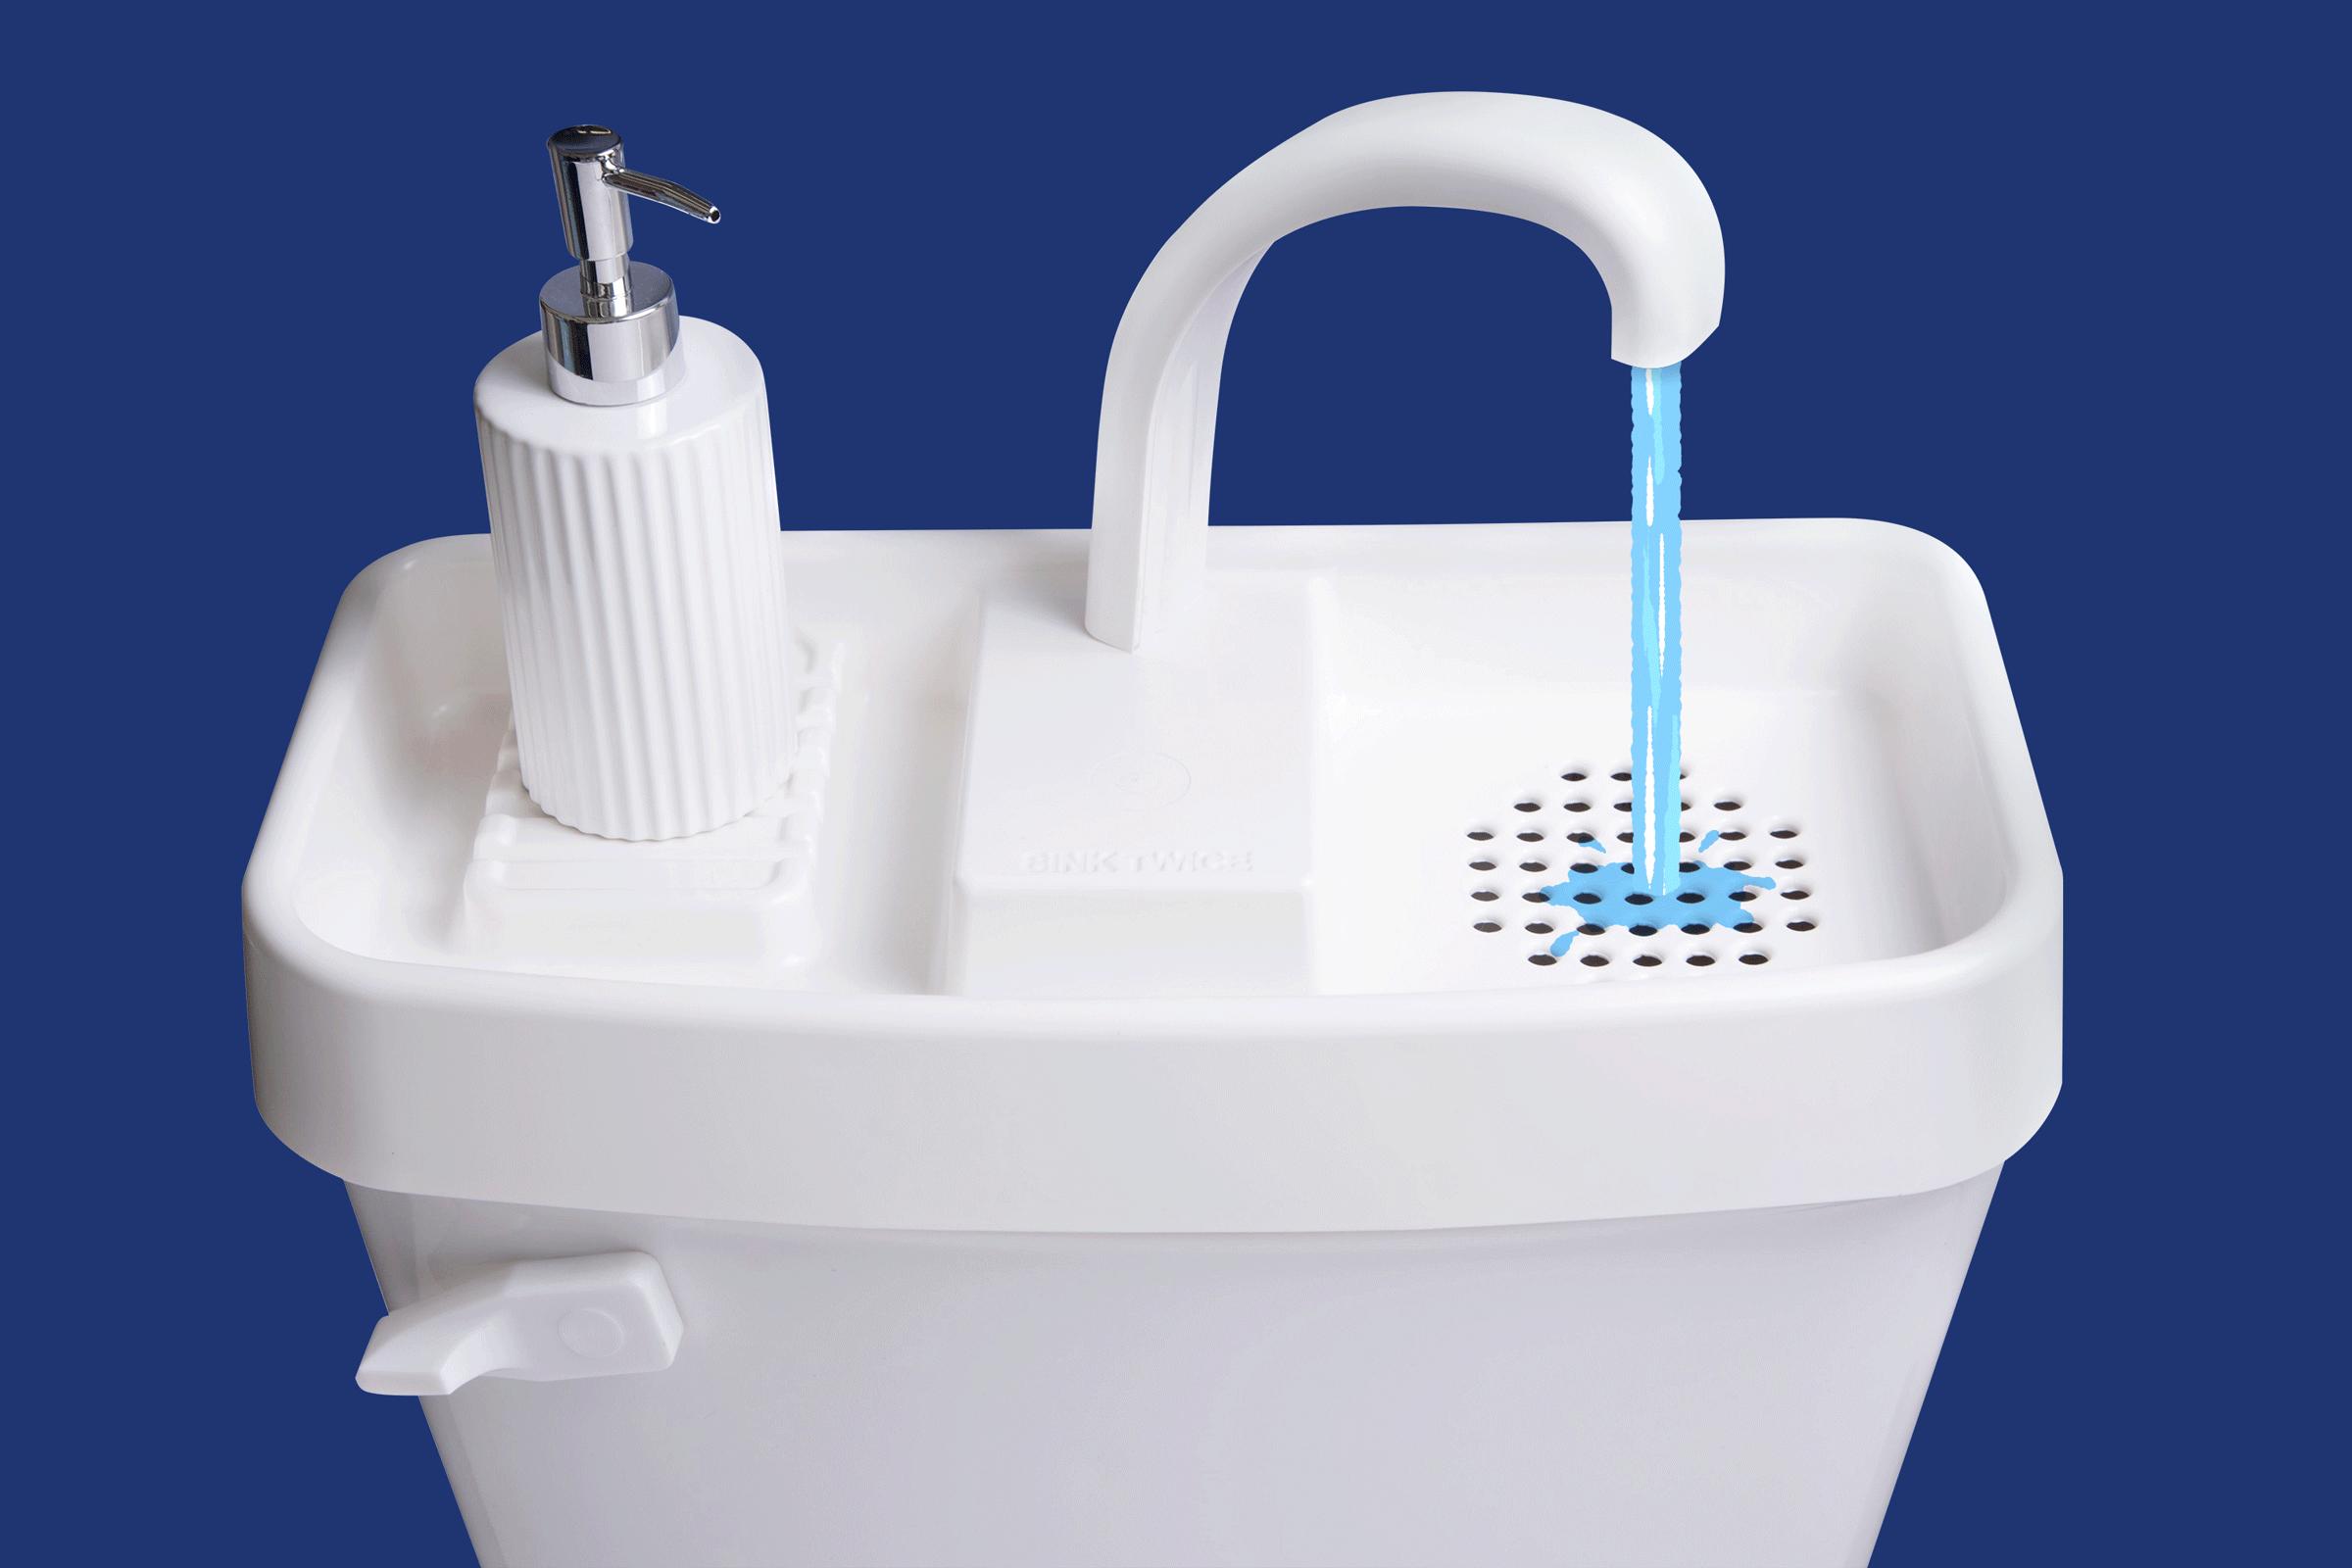 Photo illustration of a toilet with a sink in the upper tank. Animated water is flowing from the faucet.